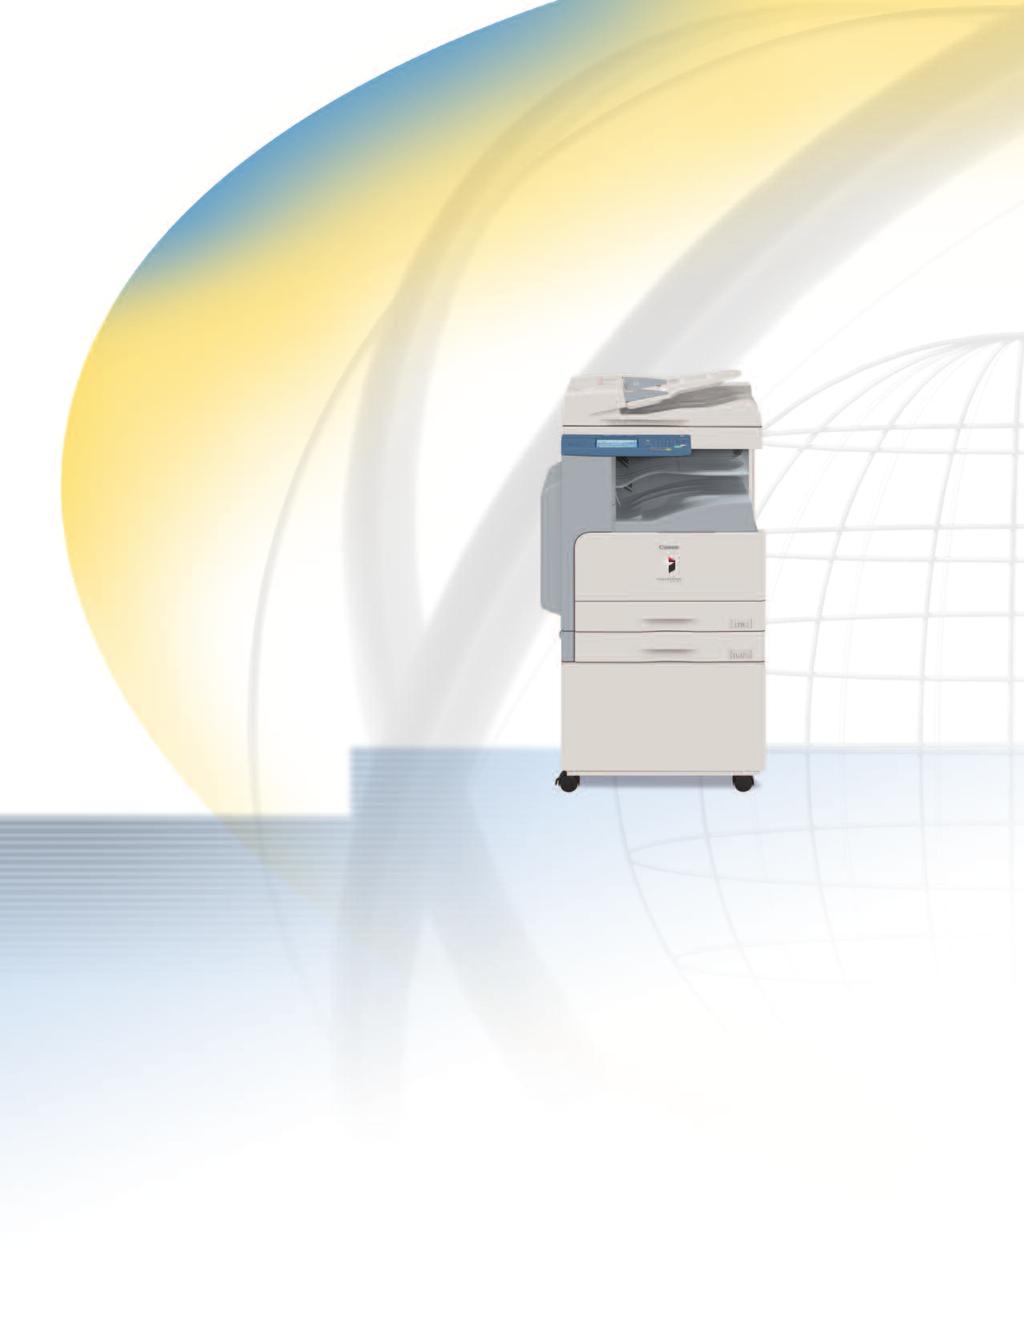 Workgroup Solutions INTRODUCING THE CANON imagerunner 2022i/2018i RUN Smart. Communicate Brilliantly.